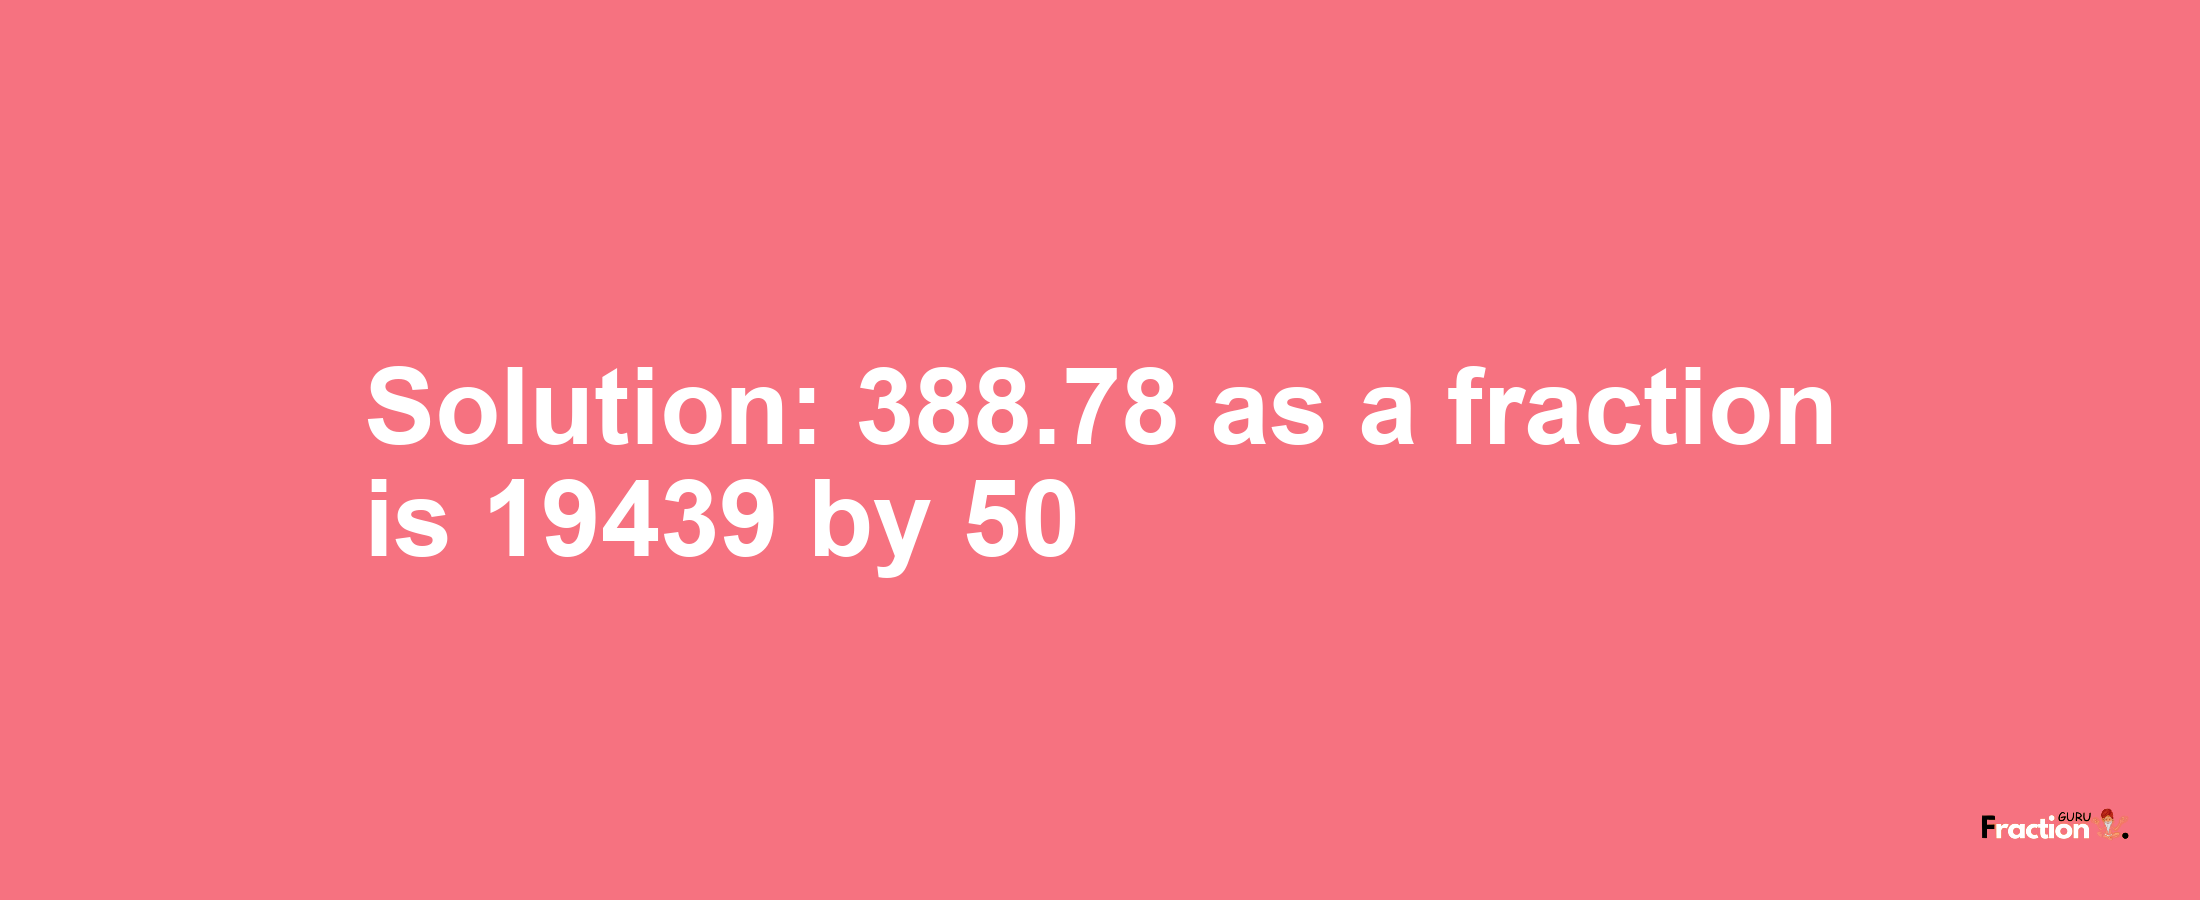 Solution:388.78 as a fraction is 19439/50